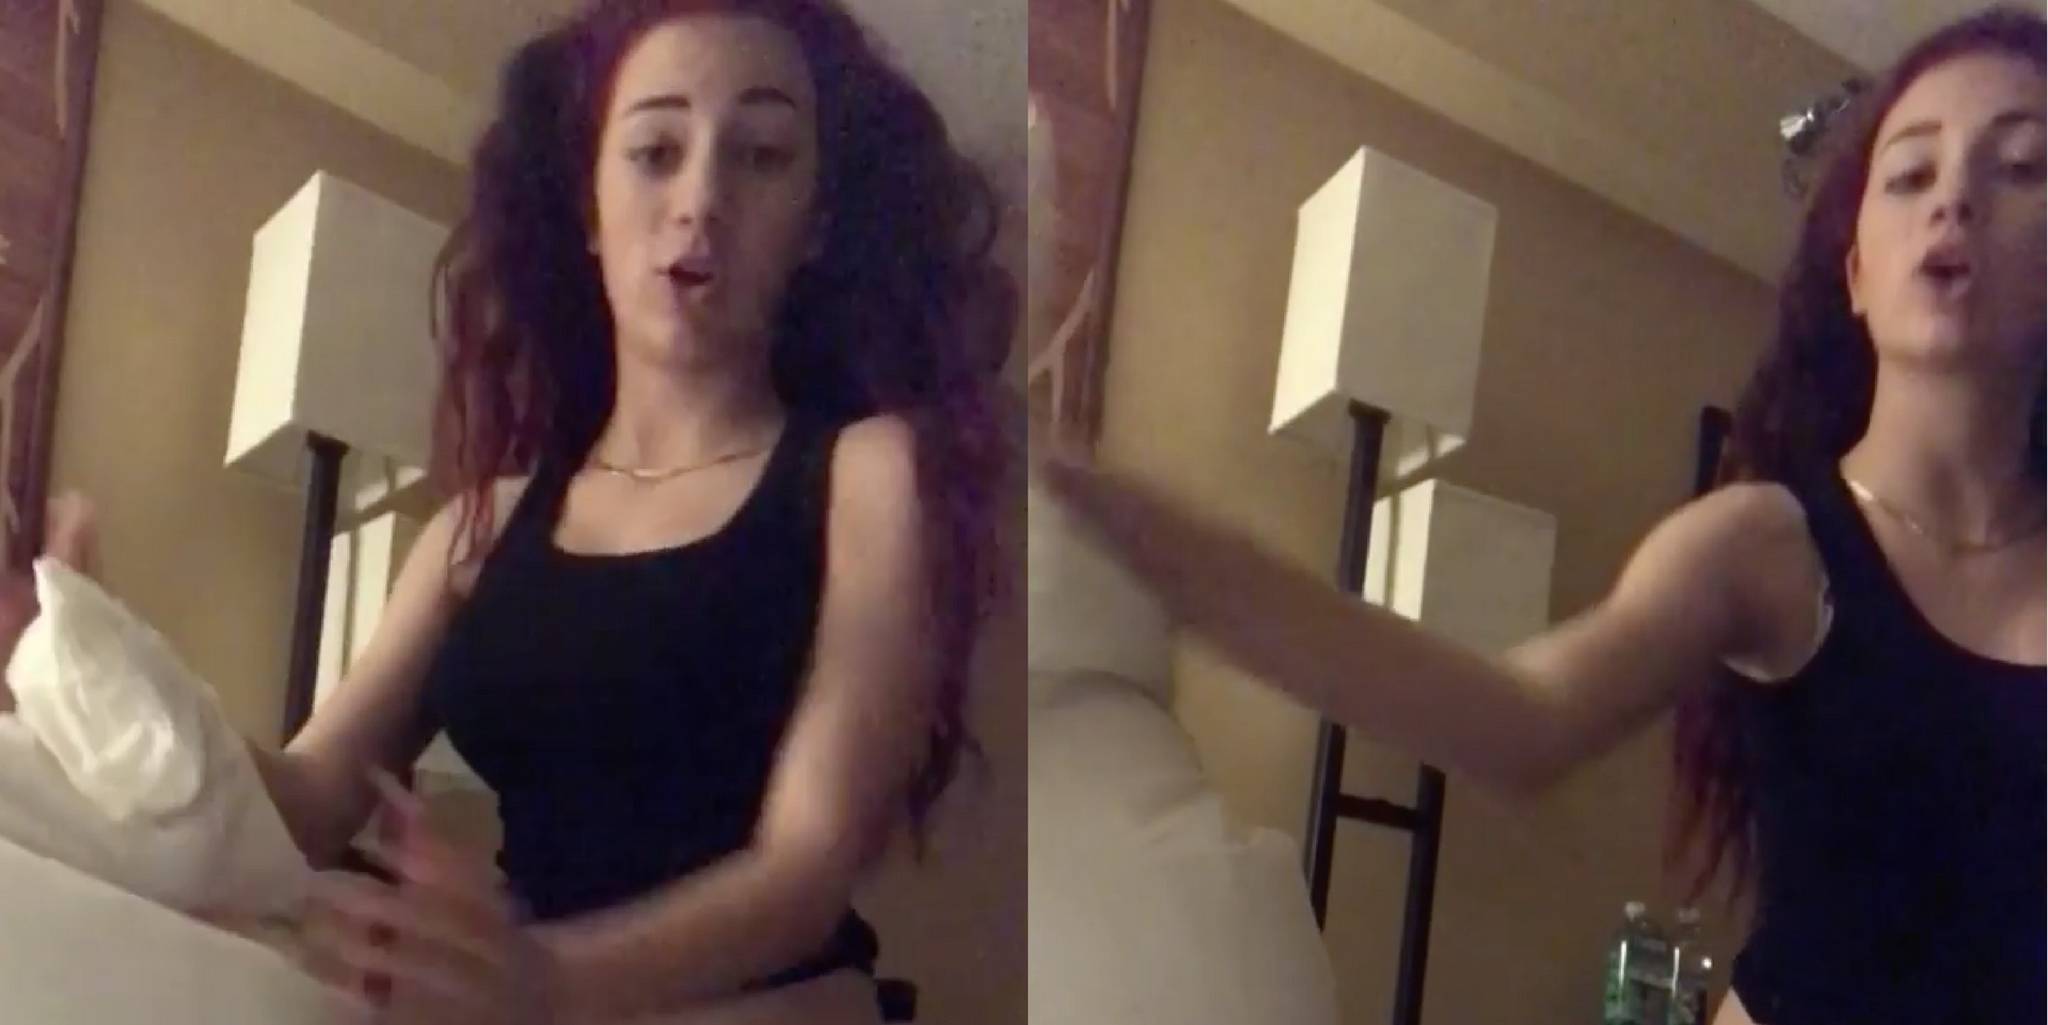 WATCH: 'Cash Me Ousside' Teen Danielle Bregoli Punches Someone on